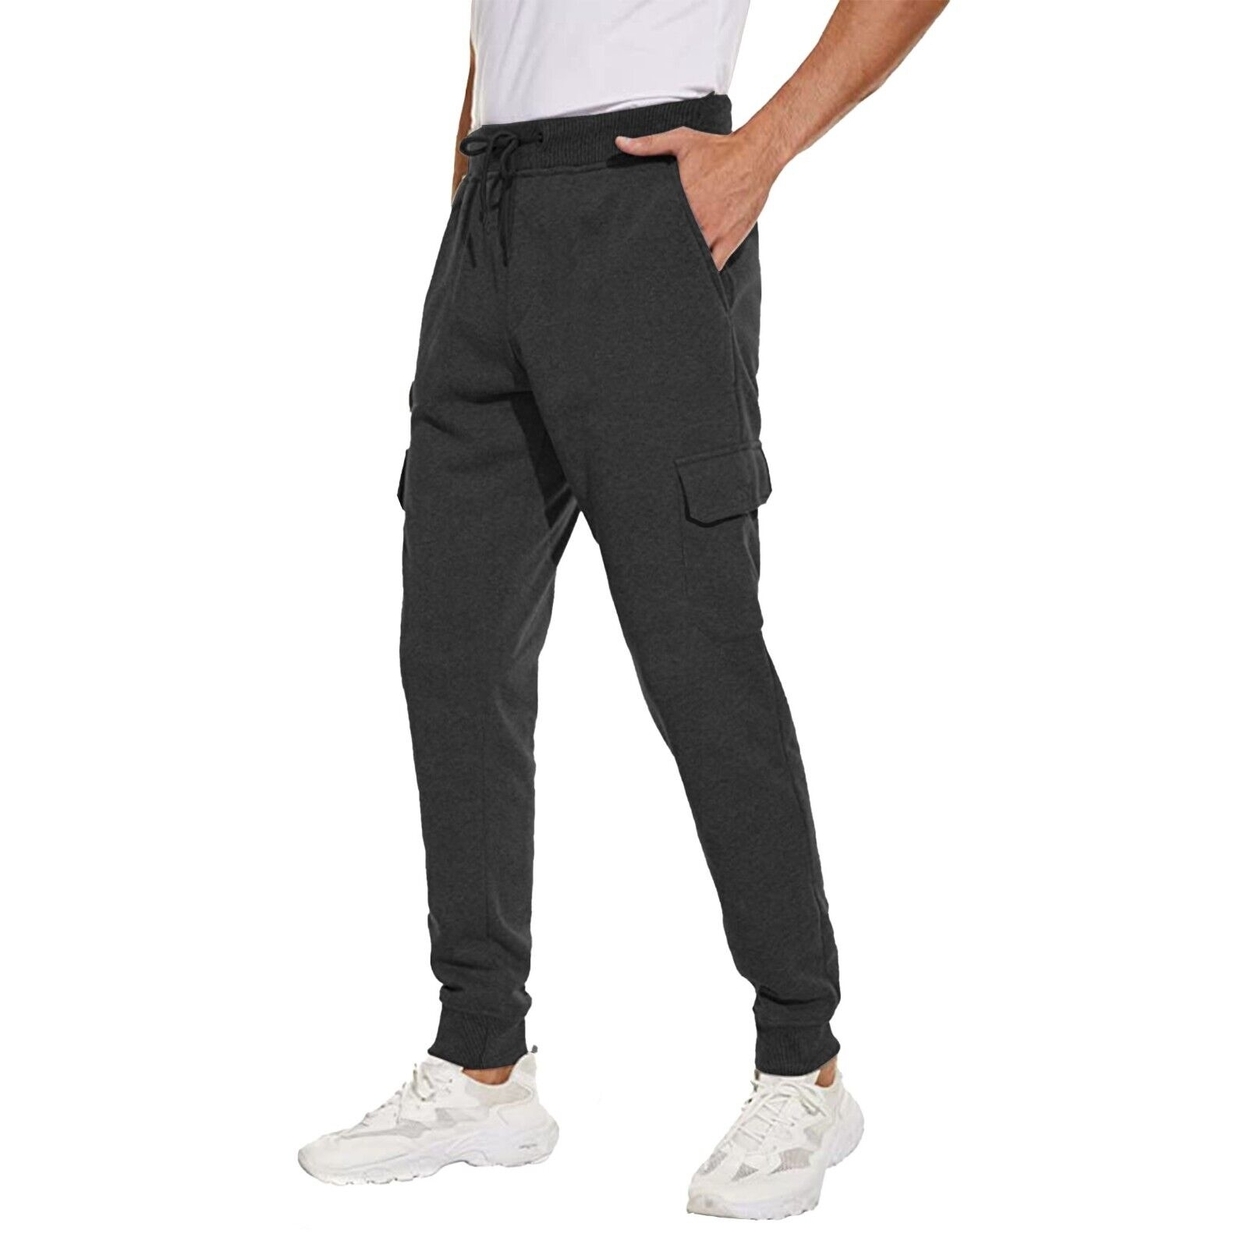 Men's Ultra Soft Winter Warm Thick Sweat Pant Athletic Sherpa Lined Jogger Pants - Black, Xx-large